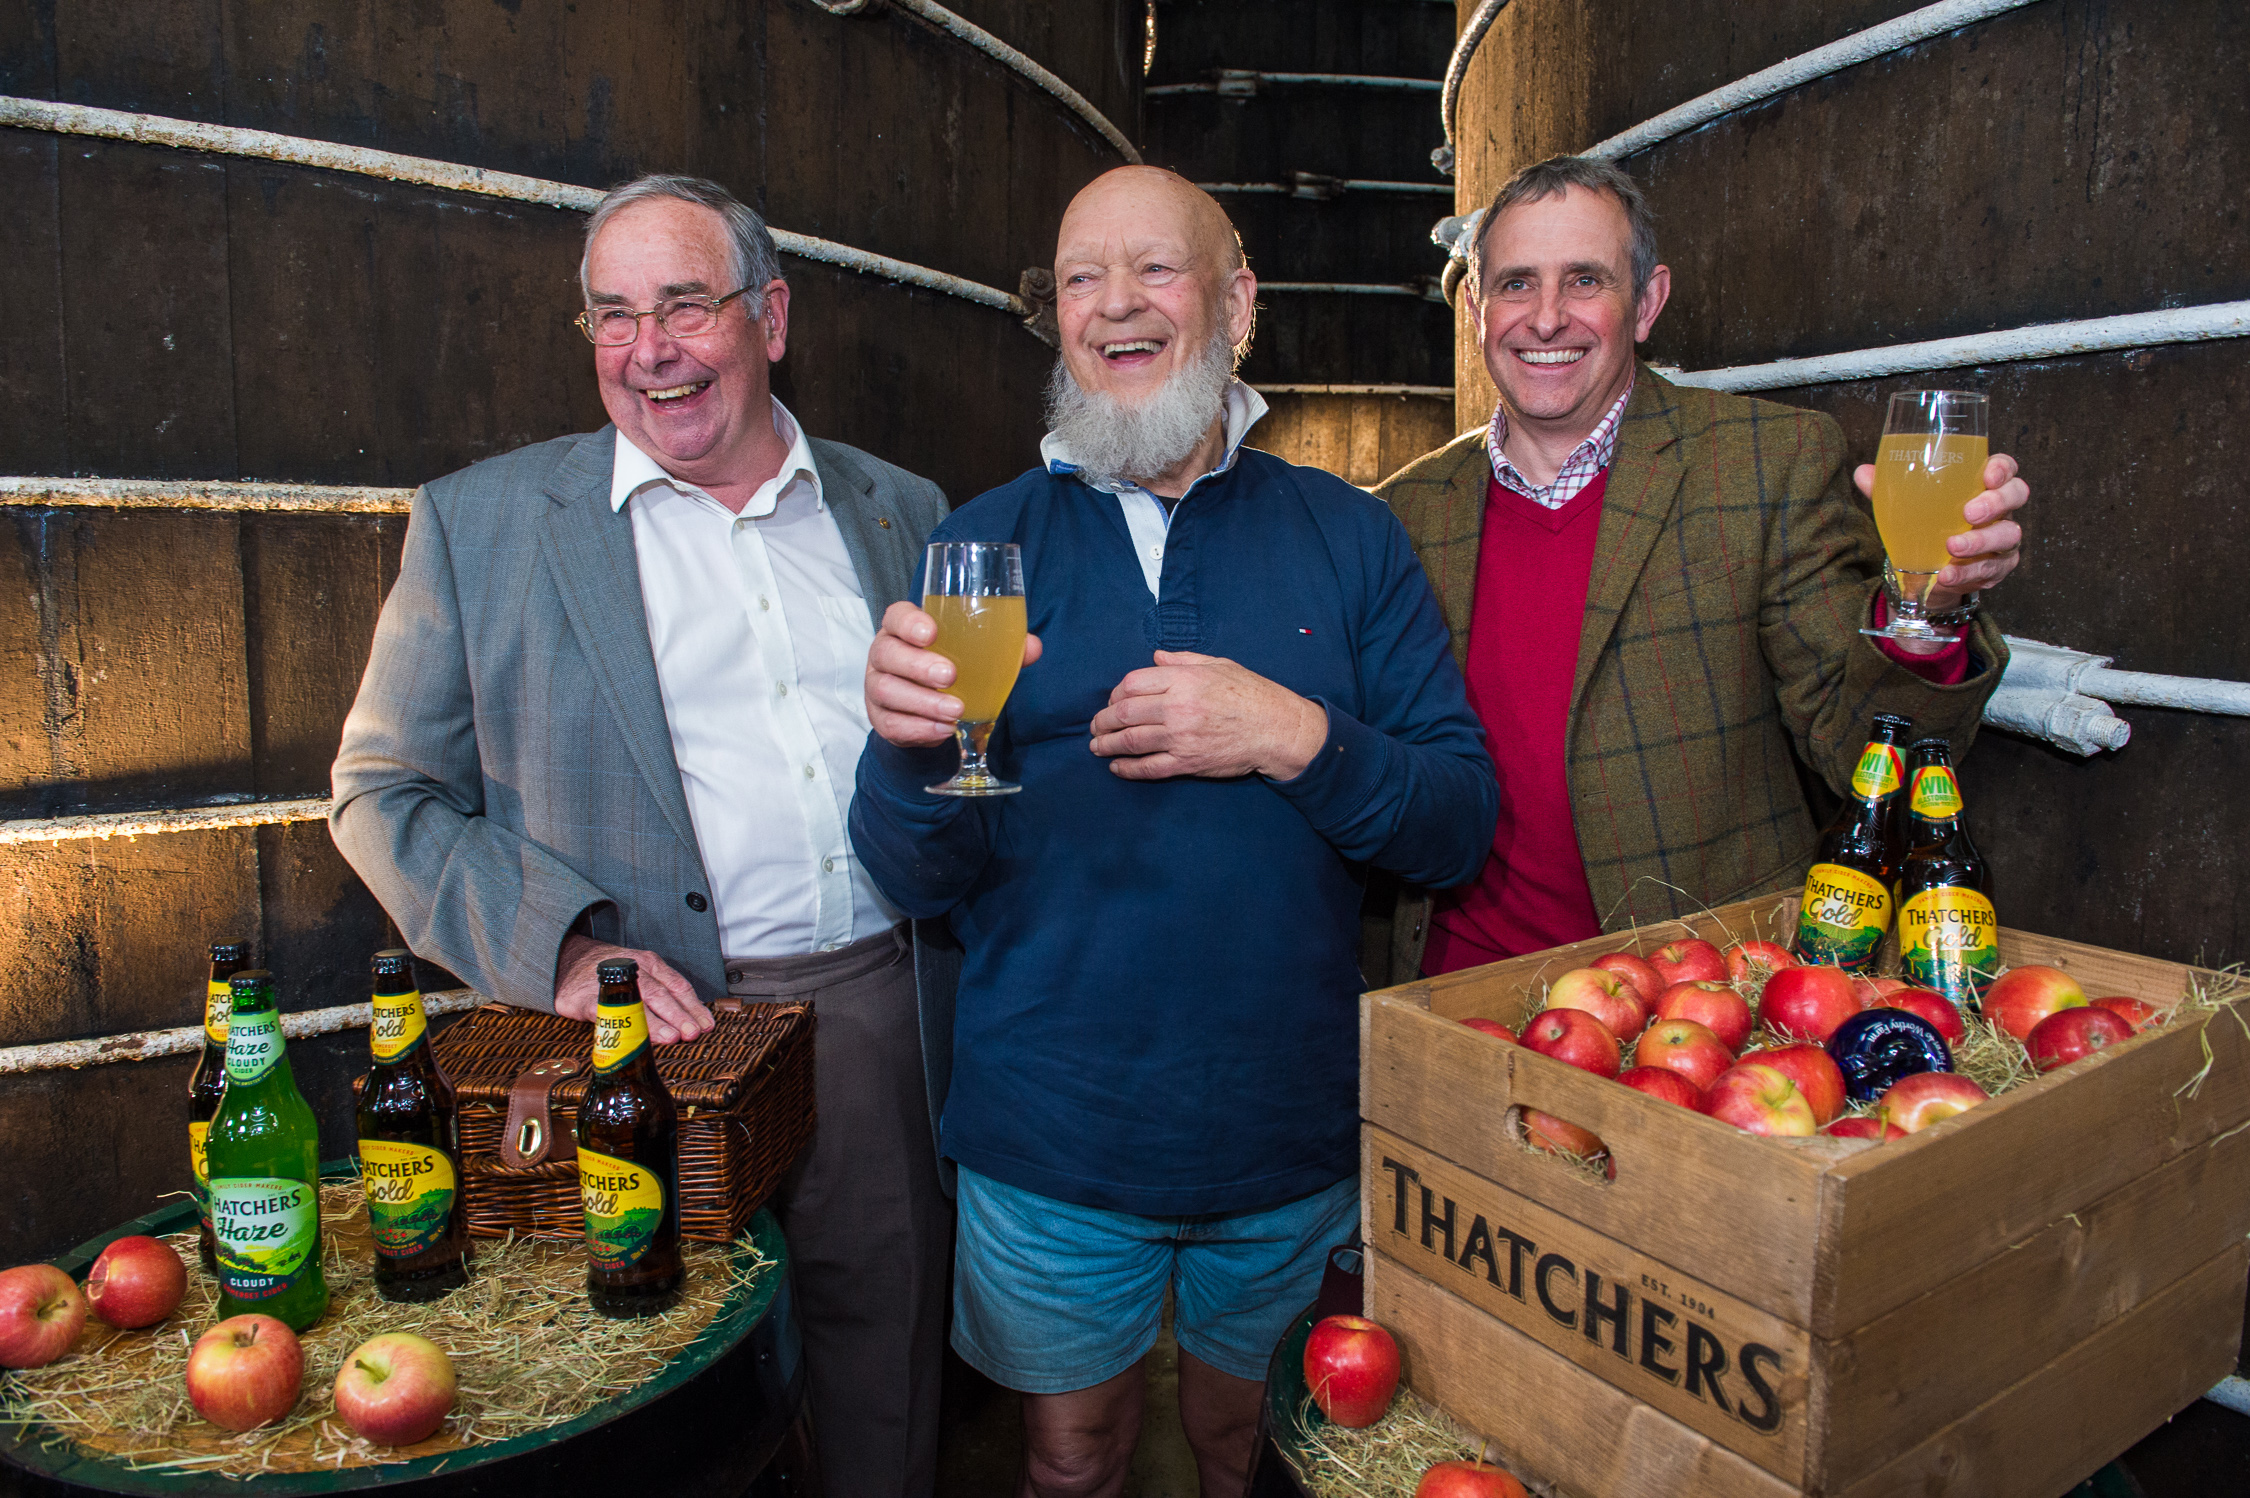 Thatchers cheers another five years as Glasto’s official cider